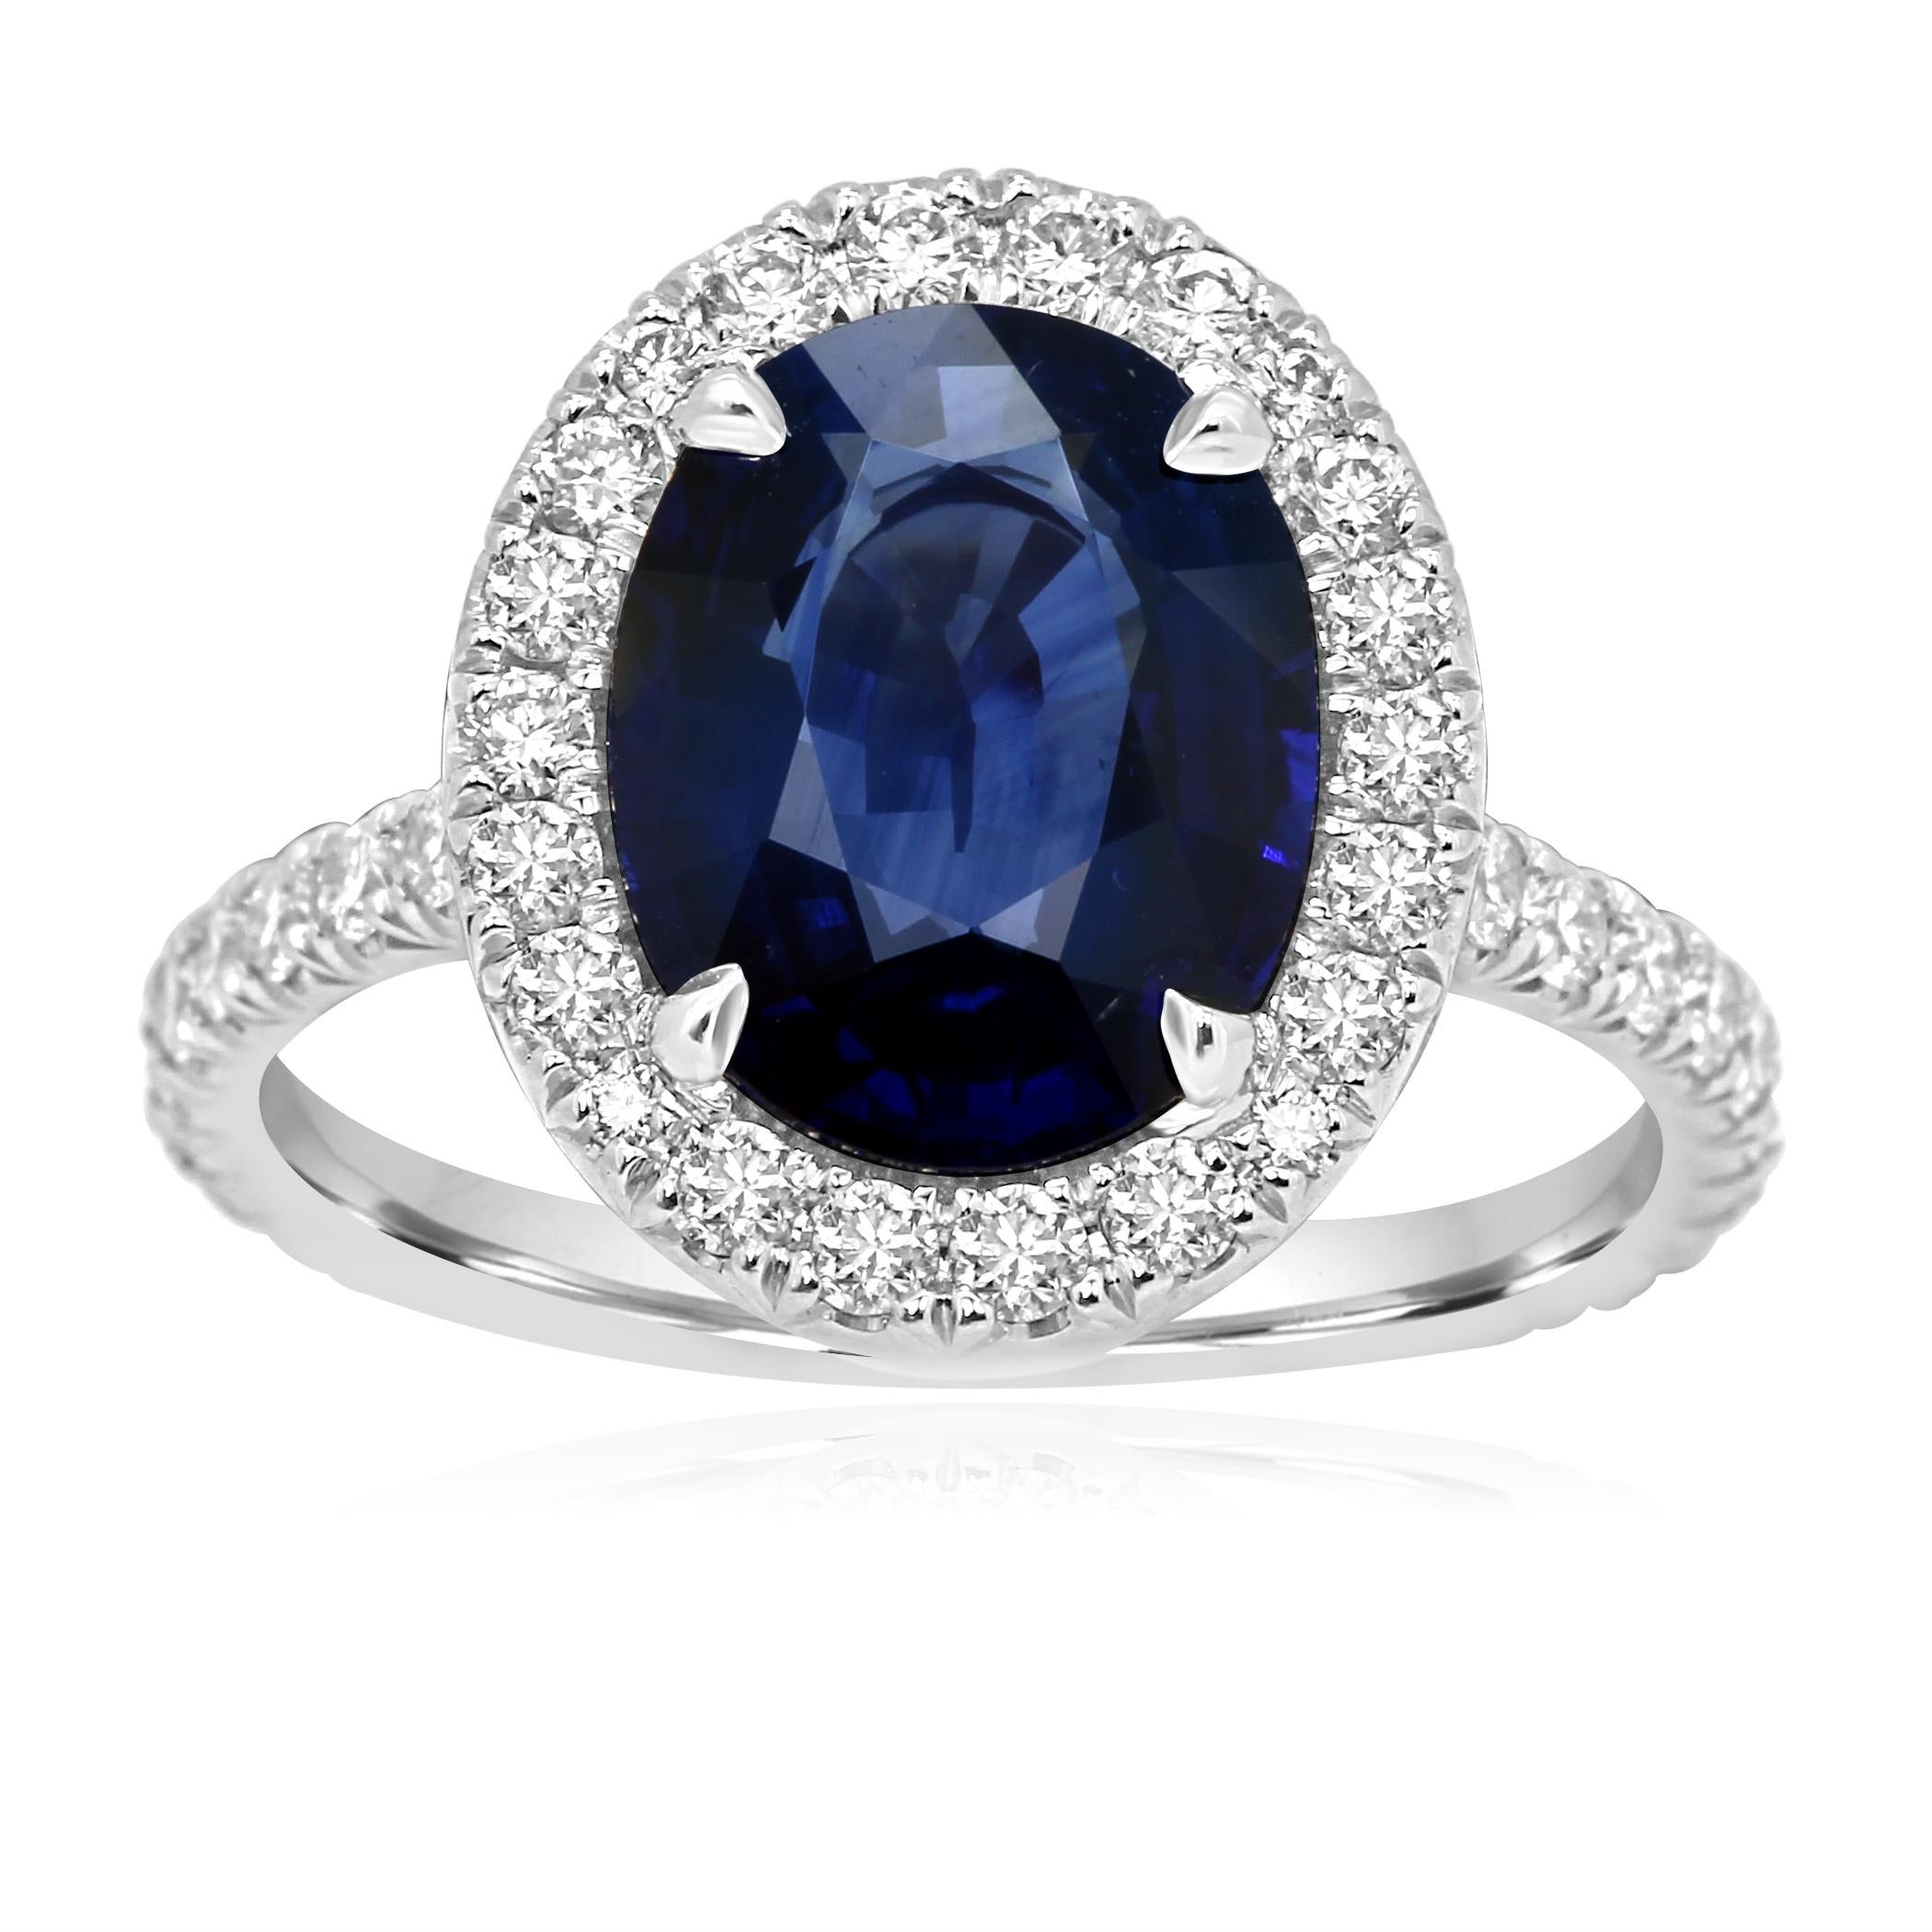 Gorgeous GIA Certified Blue Sapphire Oval 3.59 Carat Encircled in a Single Halo of Colorless VS-SI clarity Round Brilliant Diamonds 0.75 Carat Set in a Stunning Platinum Bridal Cocktail Ring.

Style available in different price ranges. Prices are